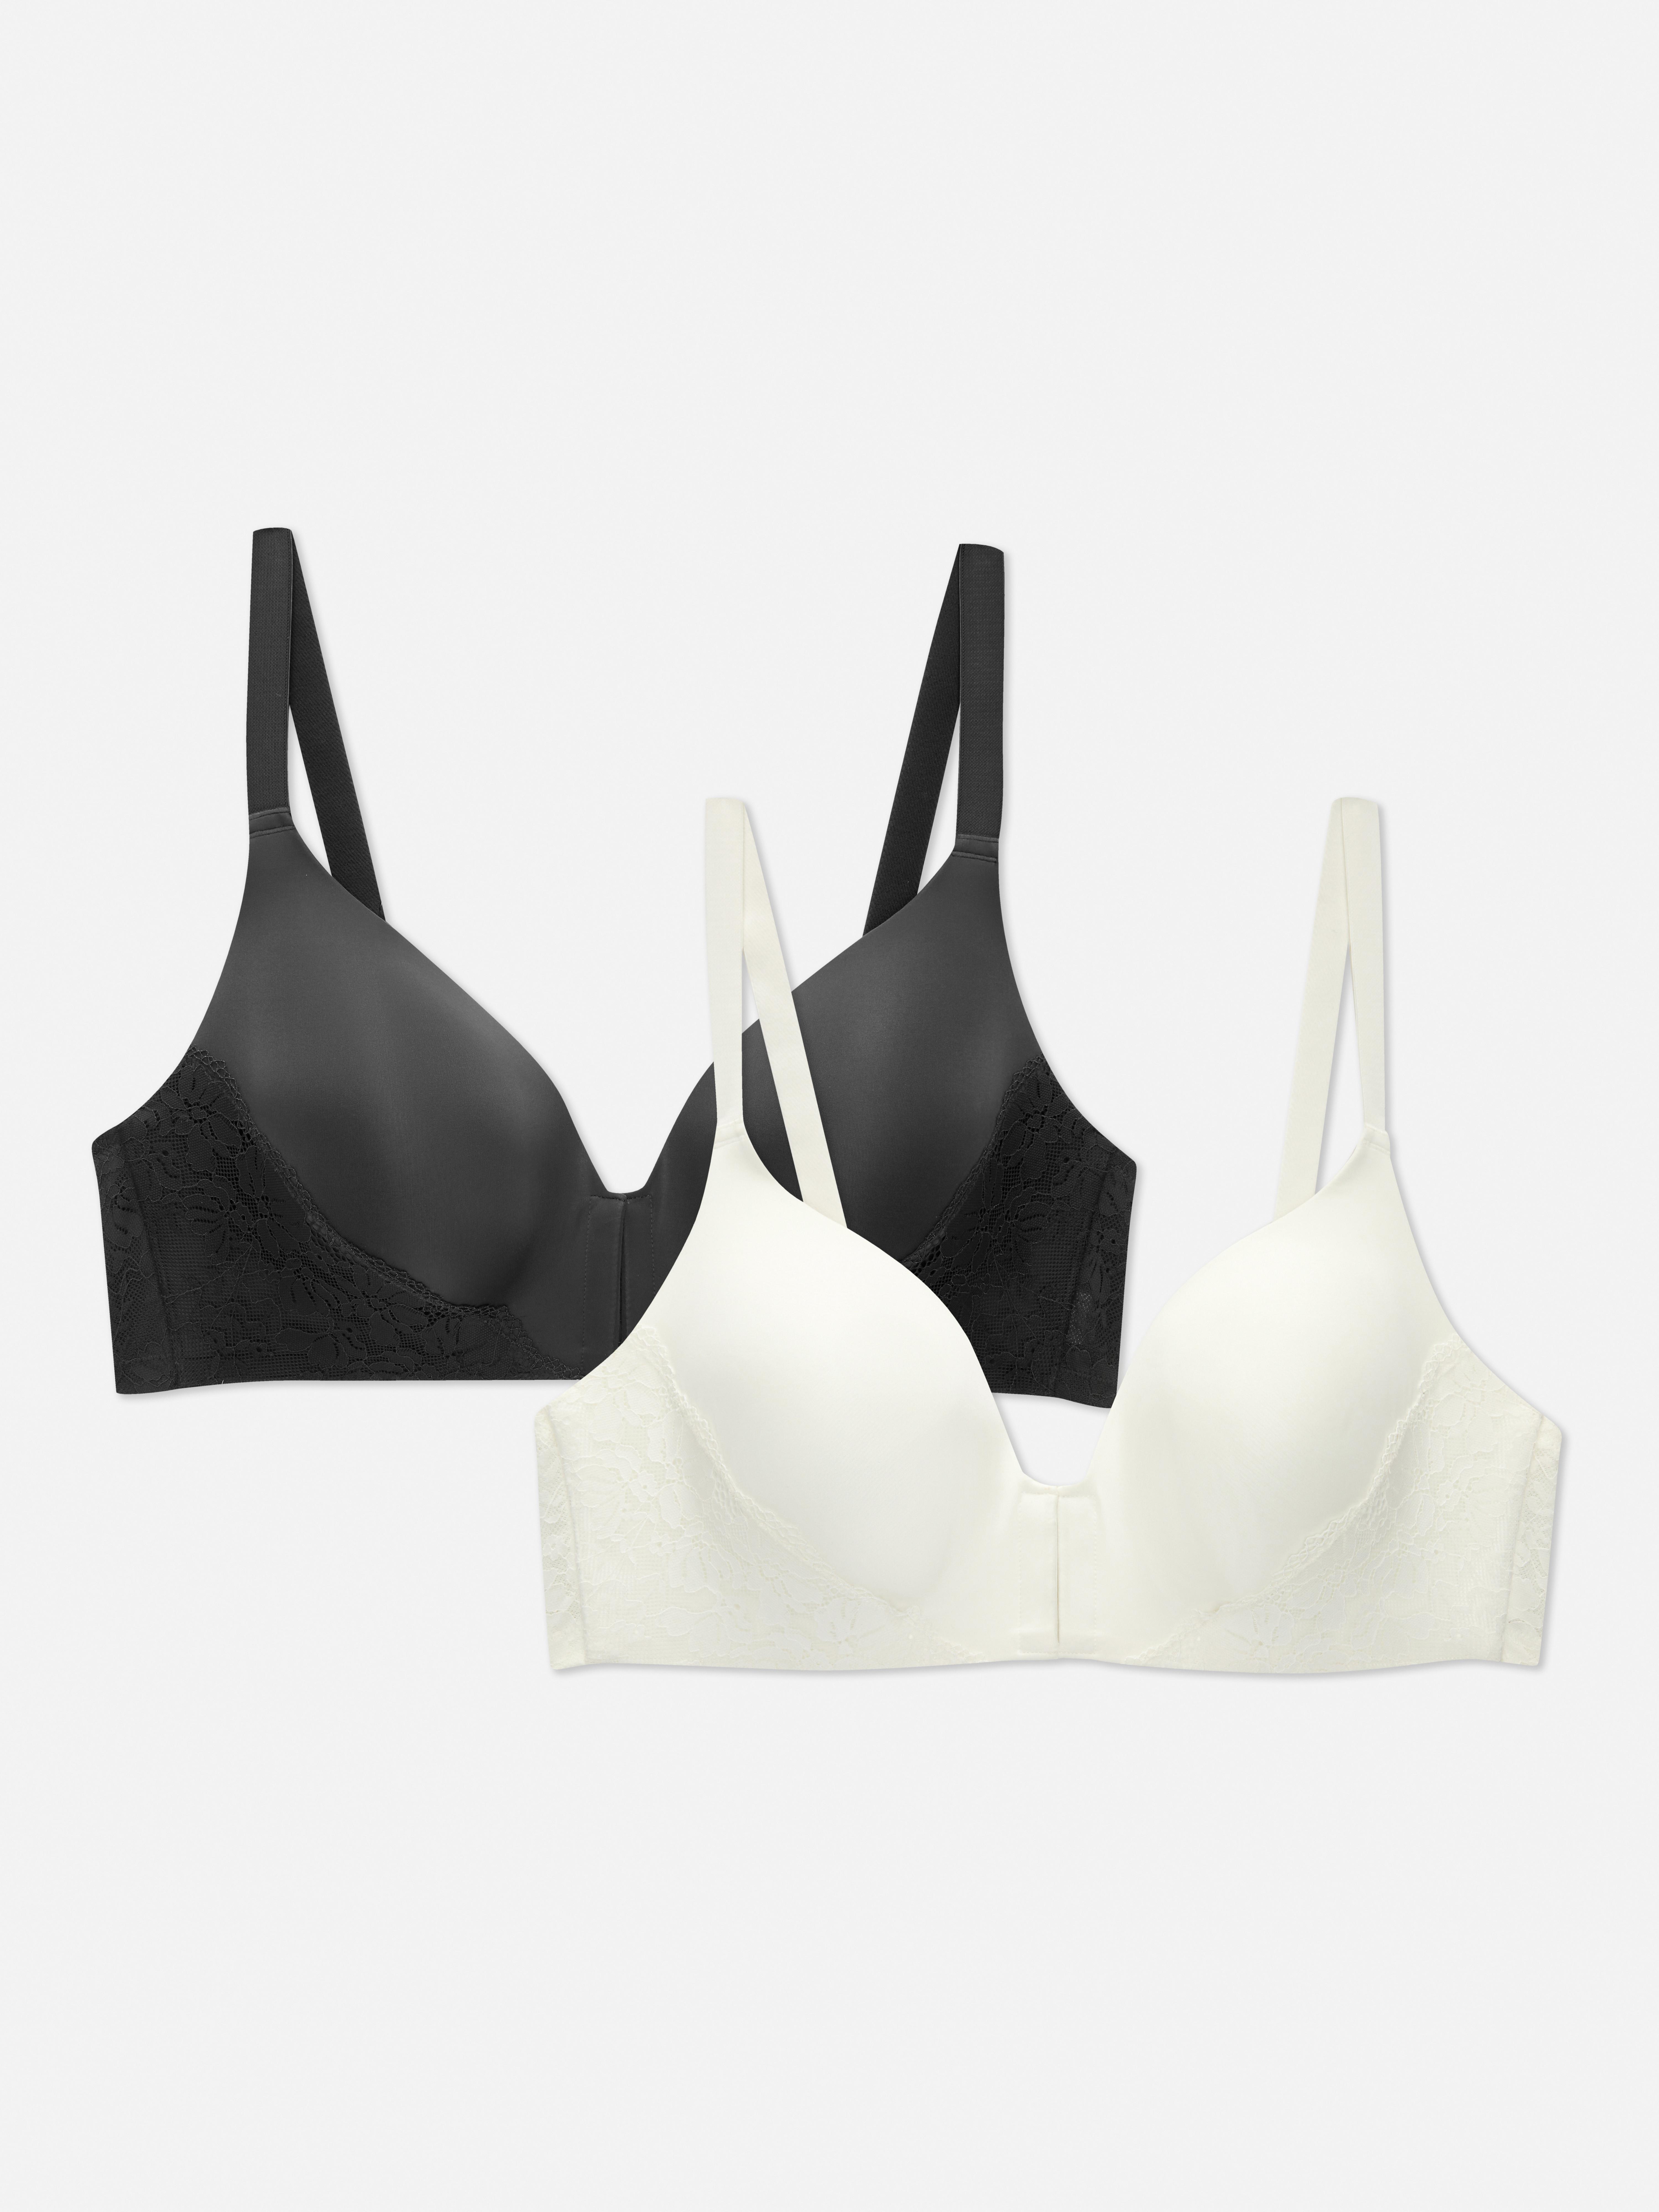 Penneys launch range of affordable post-surgery bras for Breast